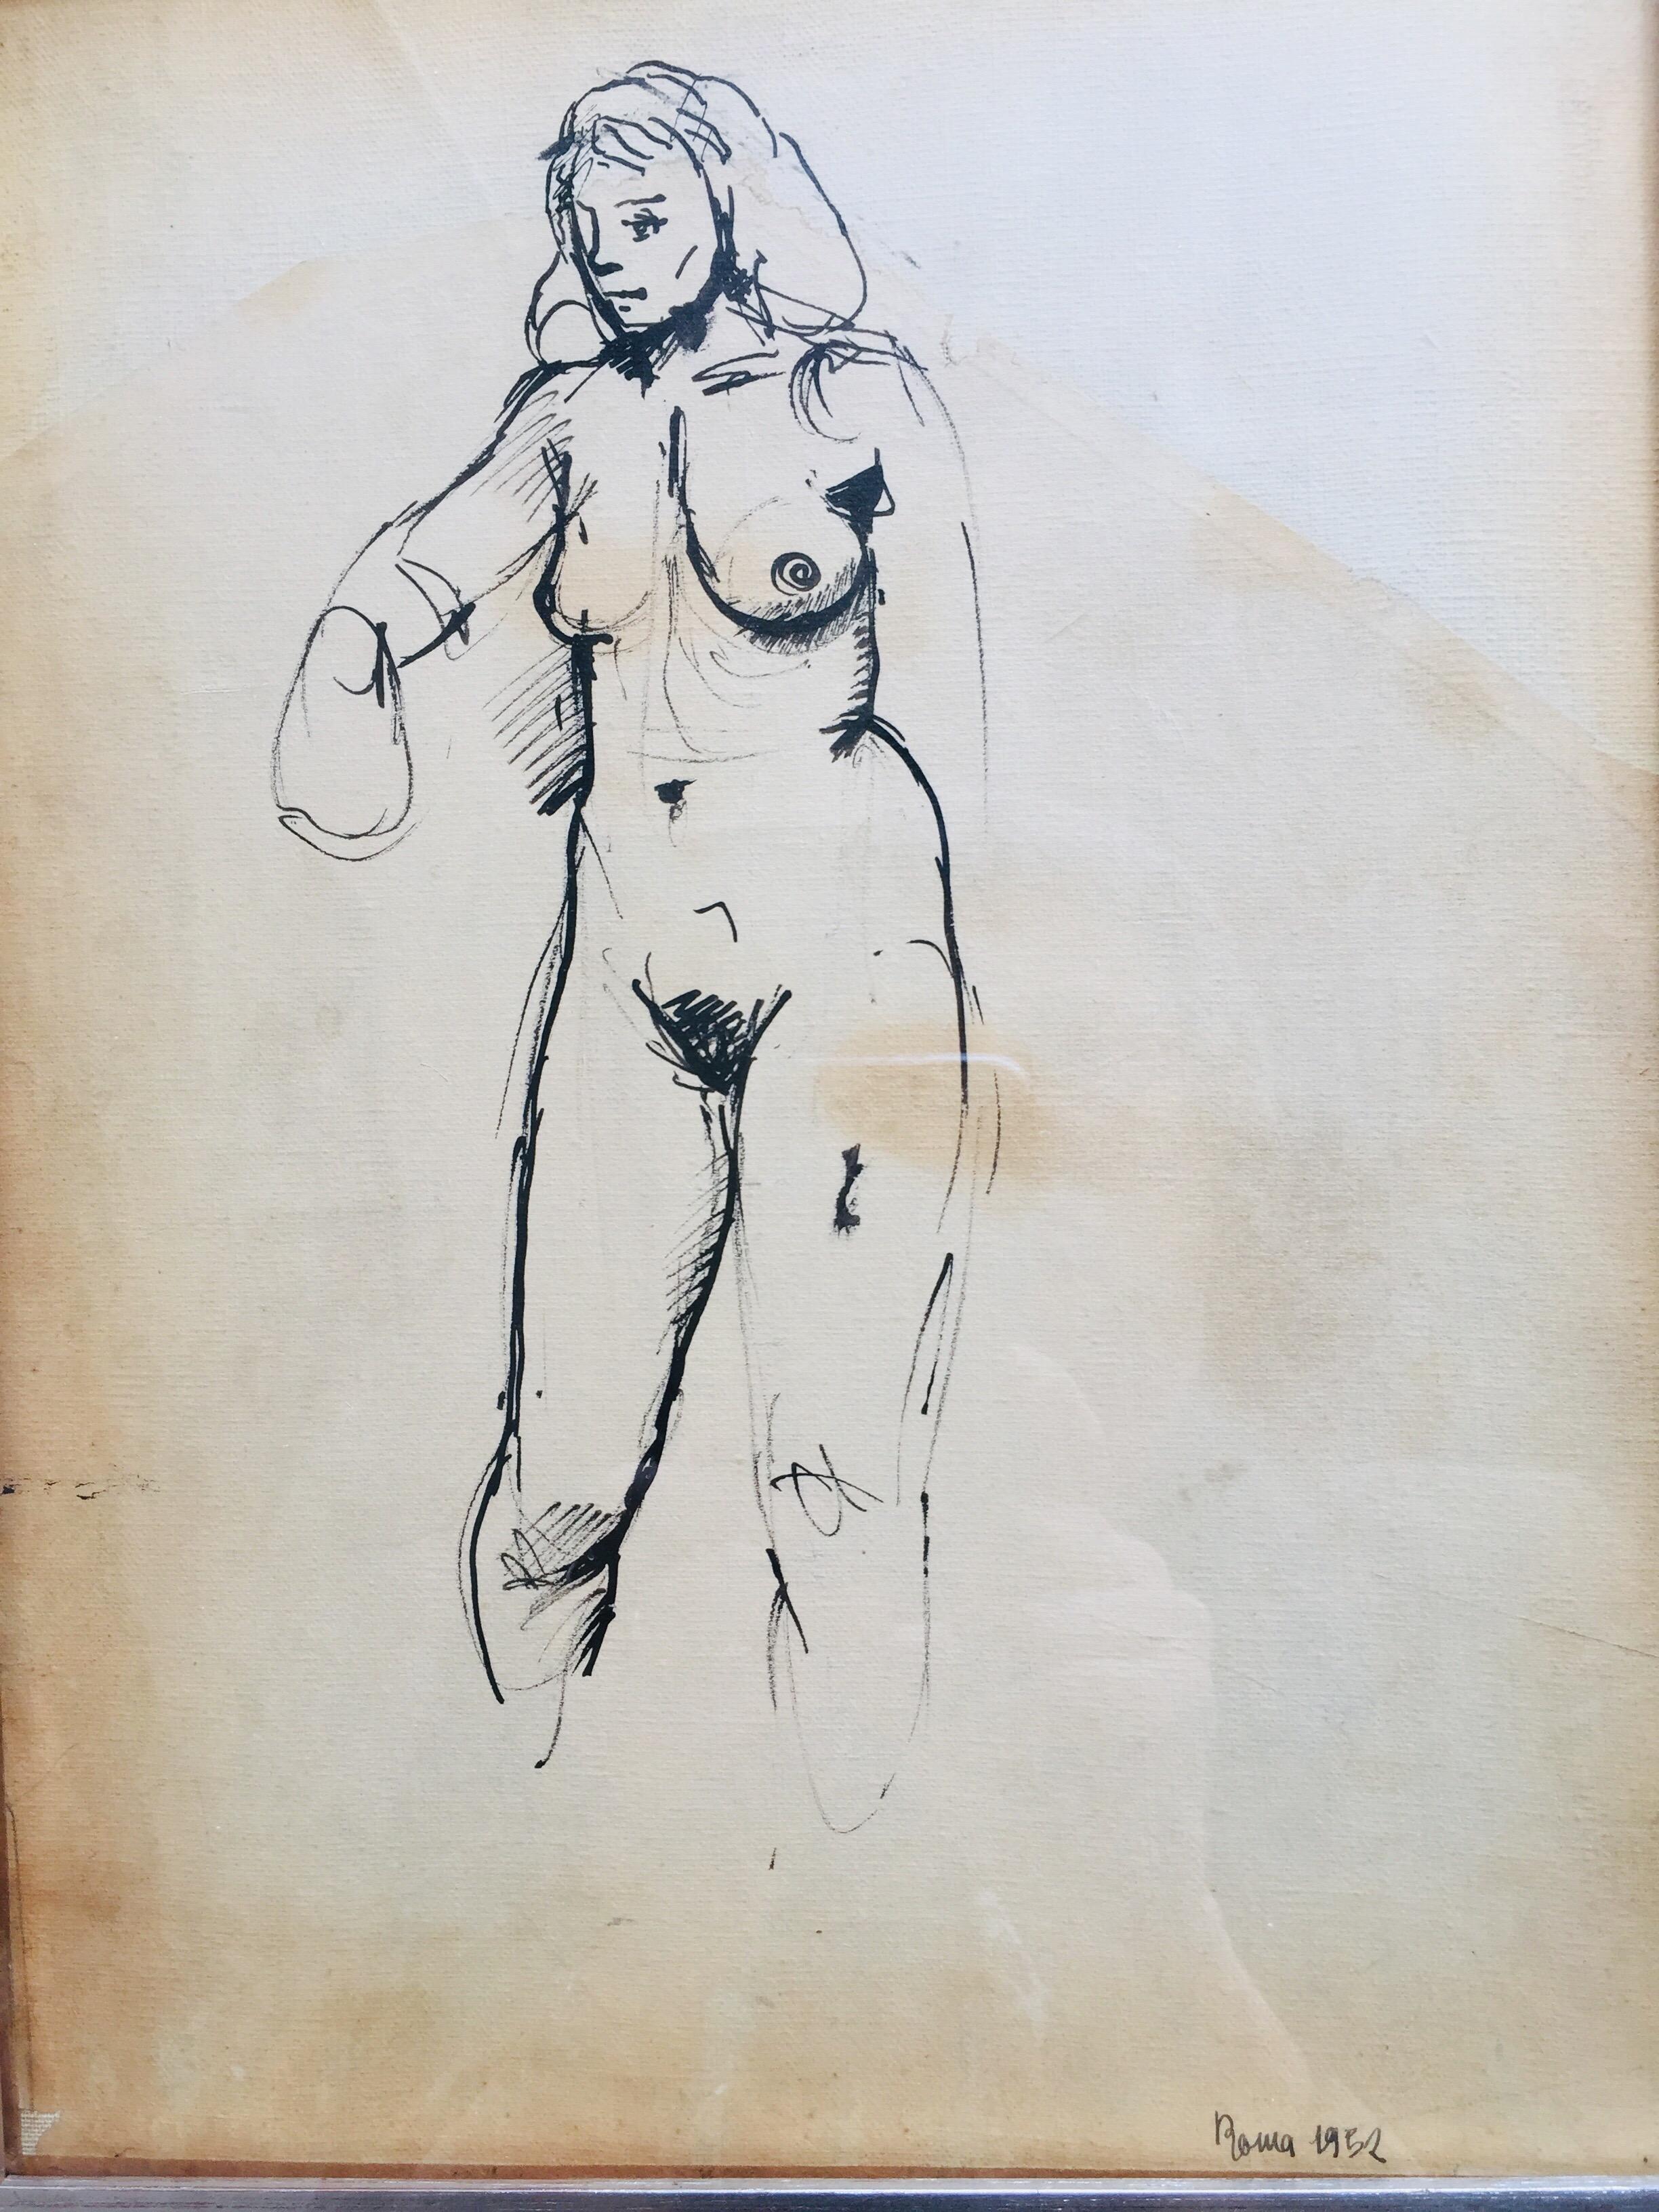 Standing female nude ink drawing, by the Italian artist Renato Guttuso (1911-1987), dated lower right Roma 1952, an original ink drawing on paper, dated lower right Roma 1952 depicting a standing nude female figure.

The drawing shows an old